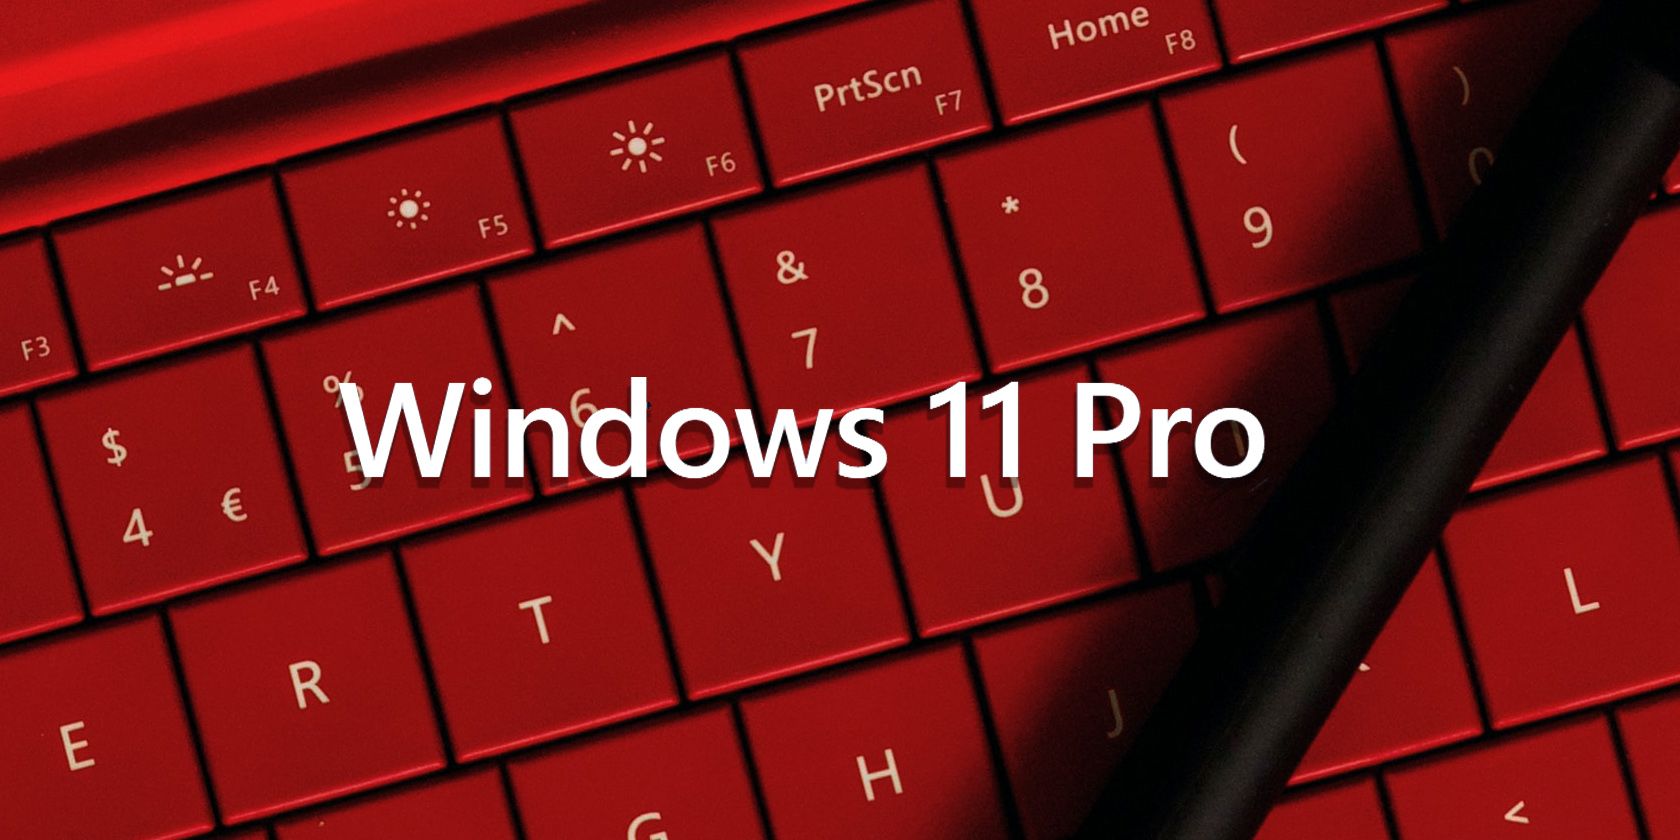 Who is Windows 11_pro best for